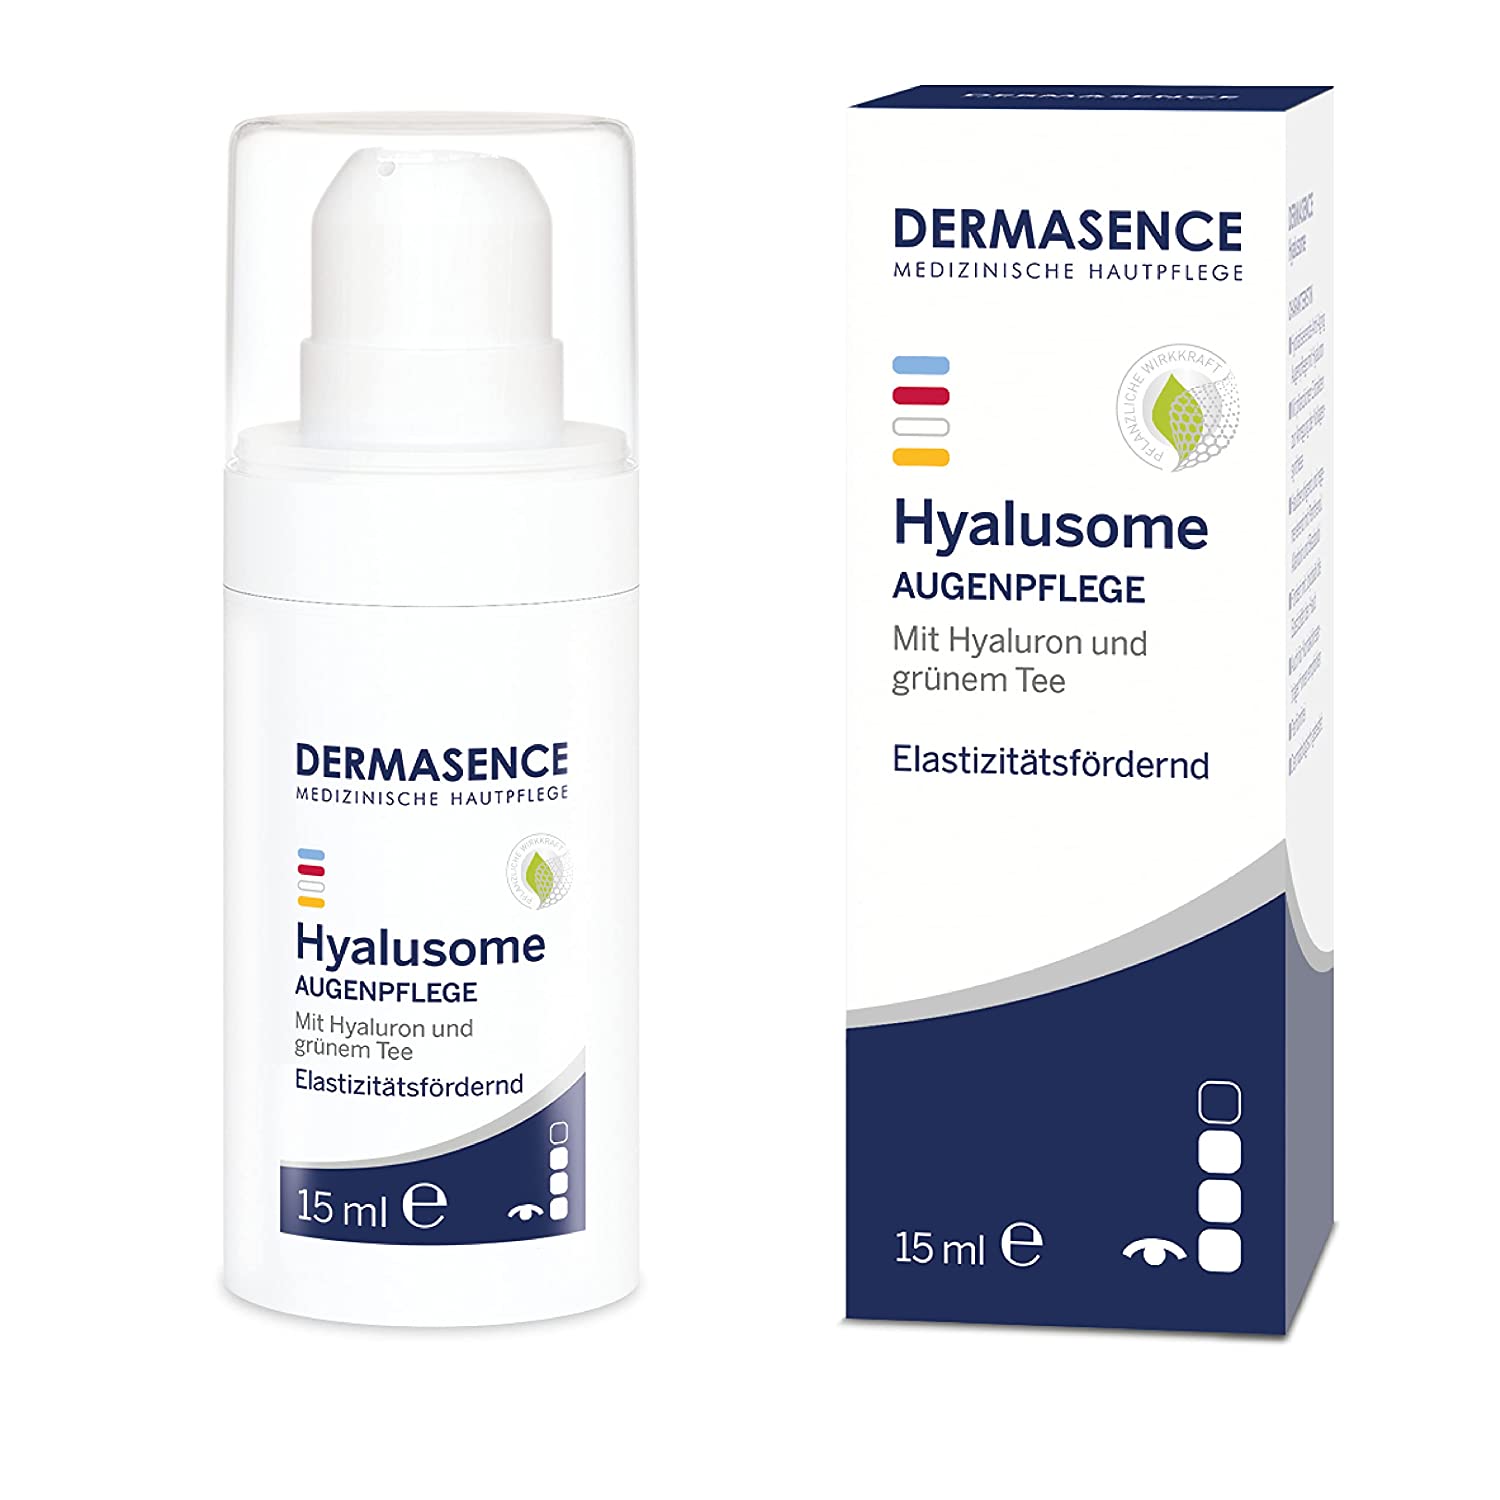 DERMASENCE Hyalusome Eye Care - Hydrating Anti-Ageing Eye Care with Hyaluron, Skin Soothing and Regenerating - 15 ml